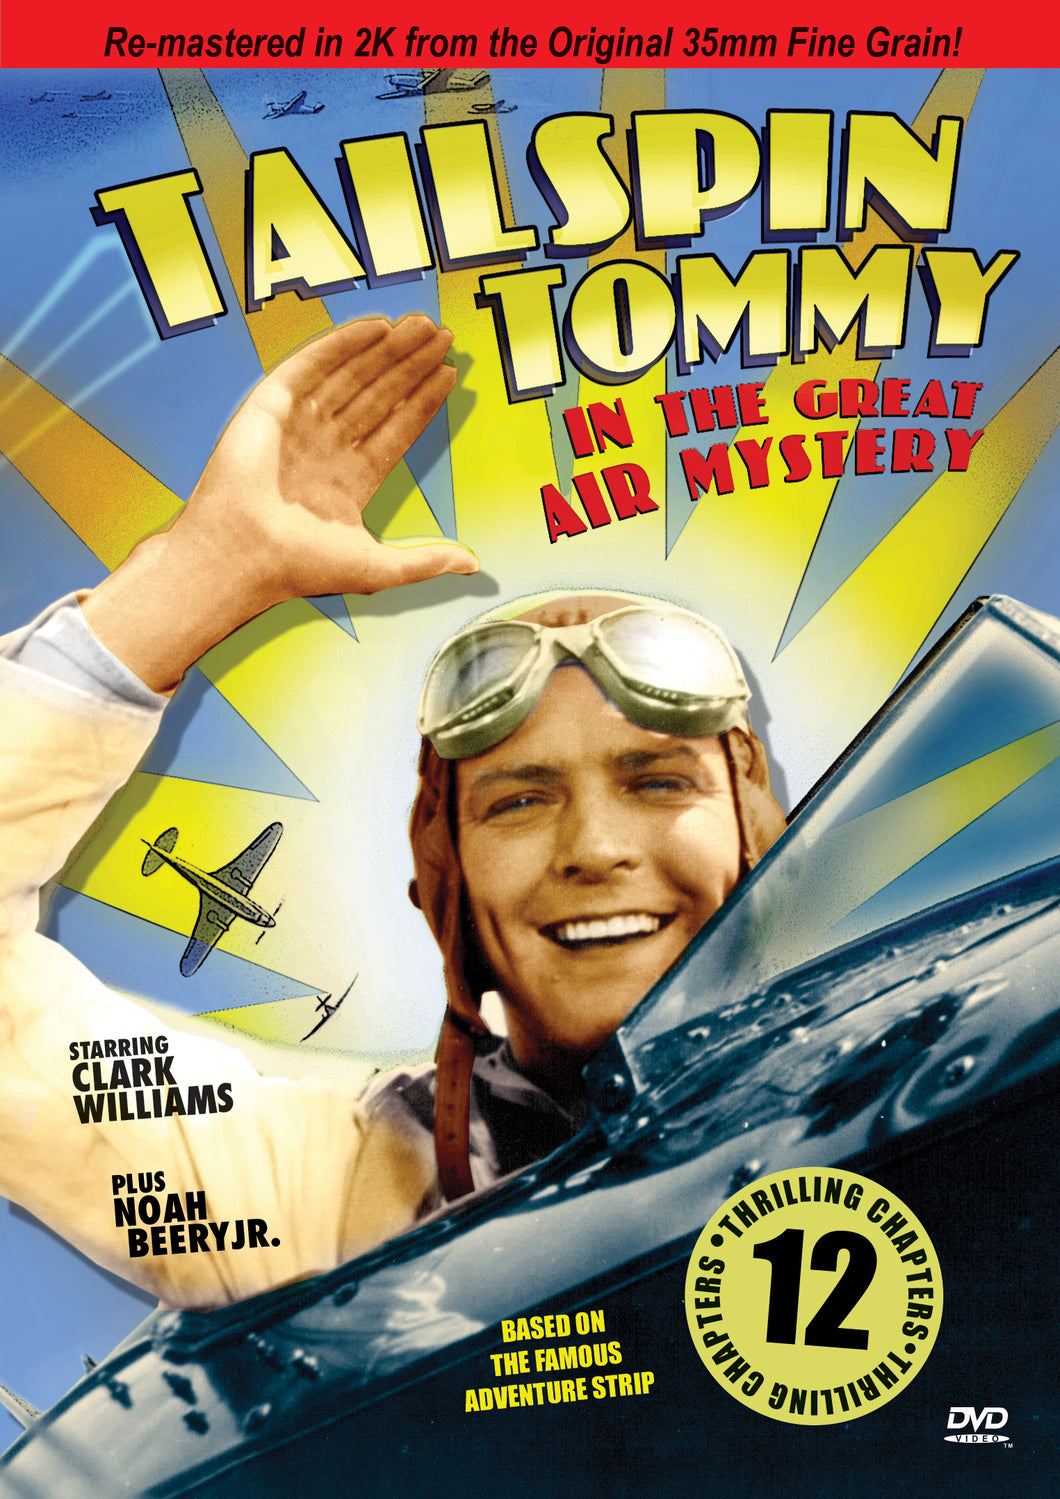 Tailspin Tommy In The Great Air Mystery (Remastered) (DVD)